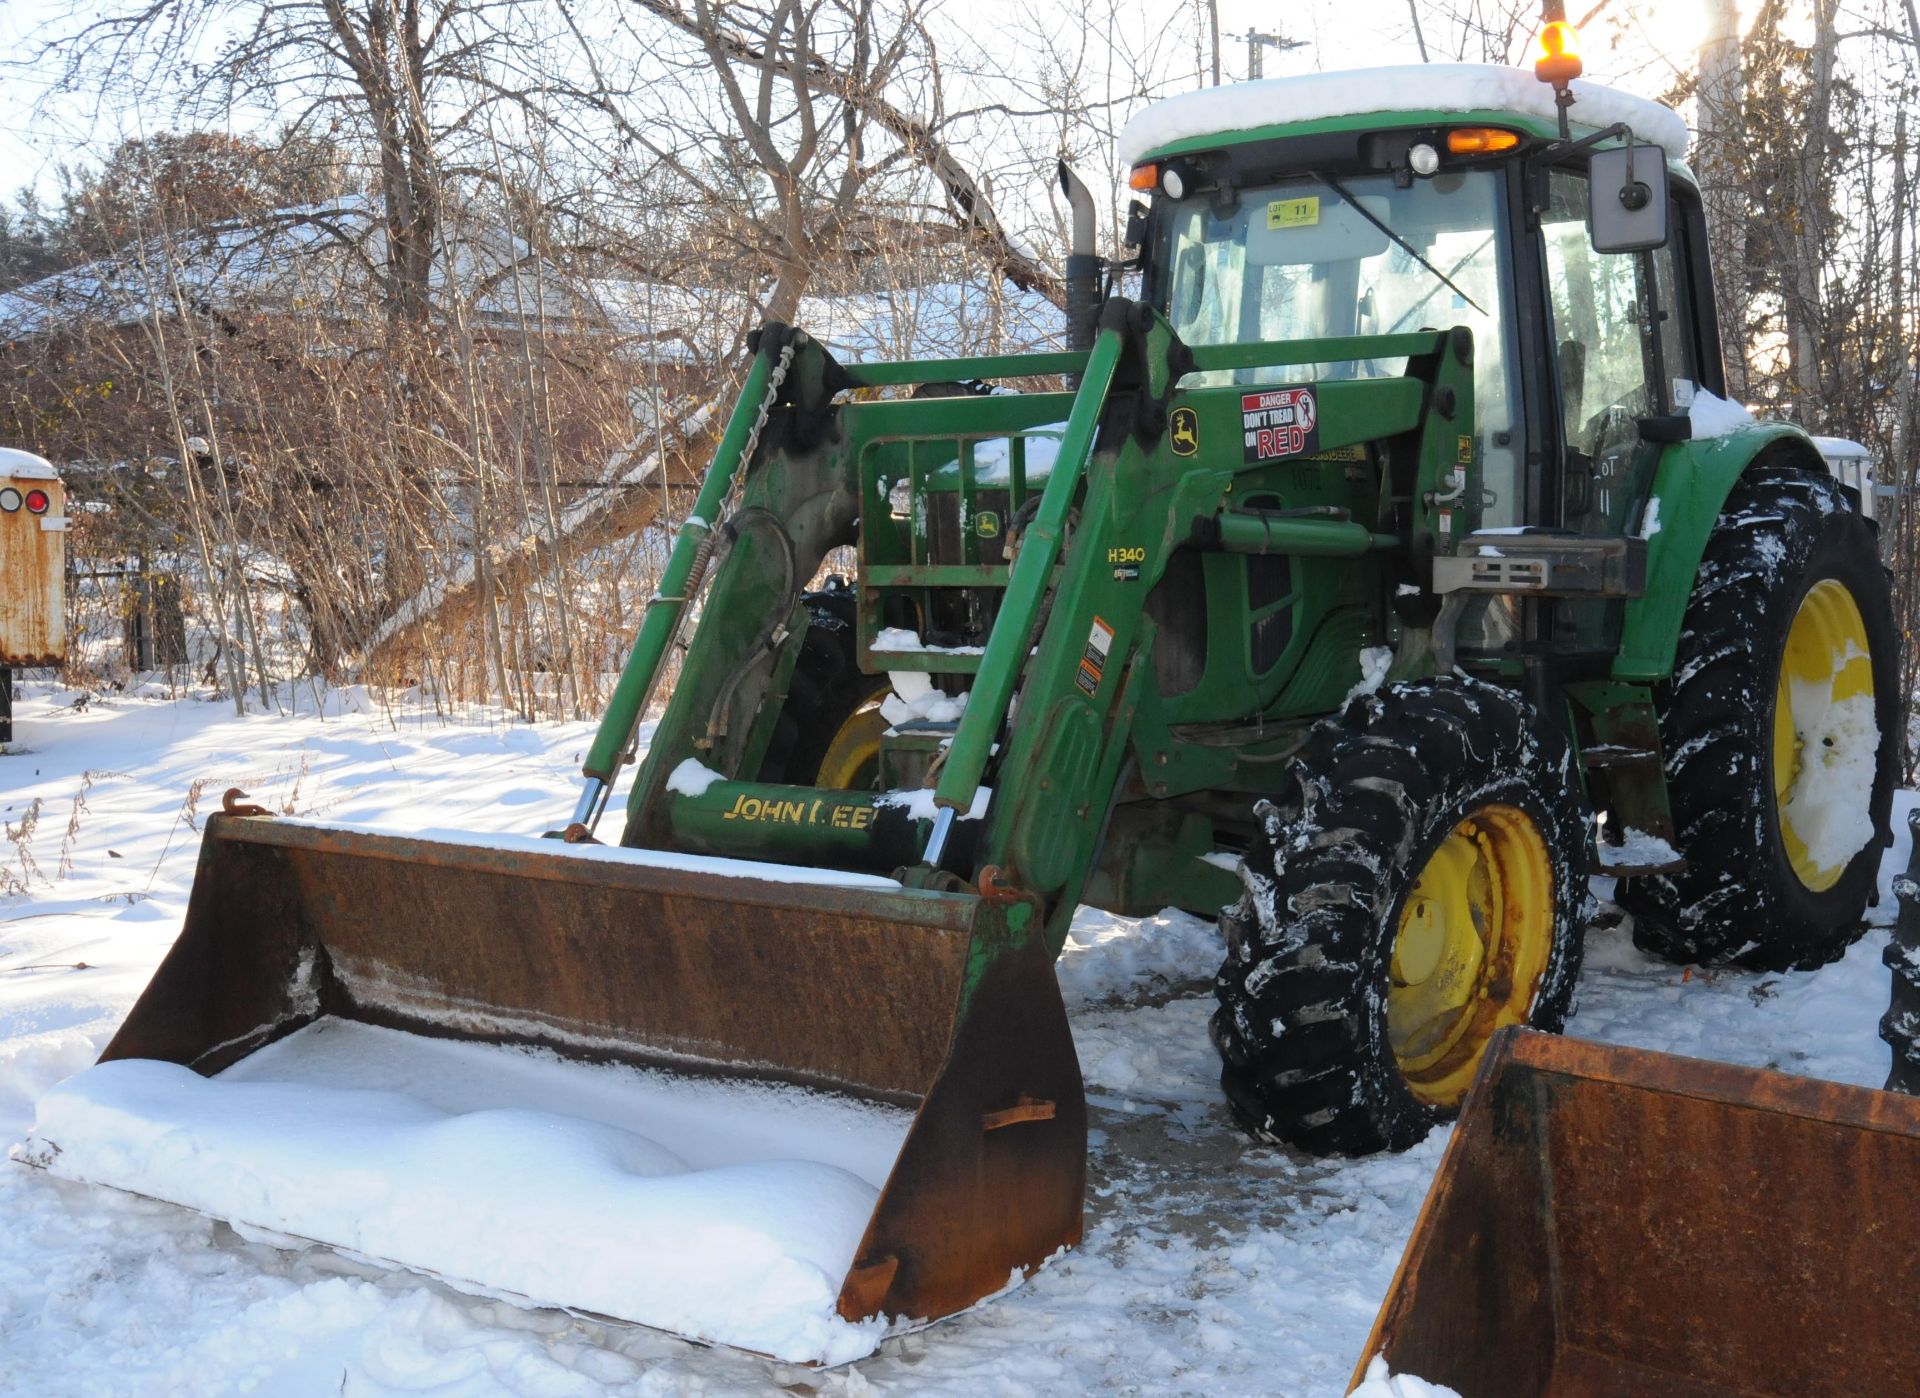 JOHN DEERE (2012) 6430 TRACTOR WITH JD 4.5L ENGINE, 4WD, JOHN DEERE H340 HYDRAULIC LOADER - Image 3 of 9